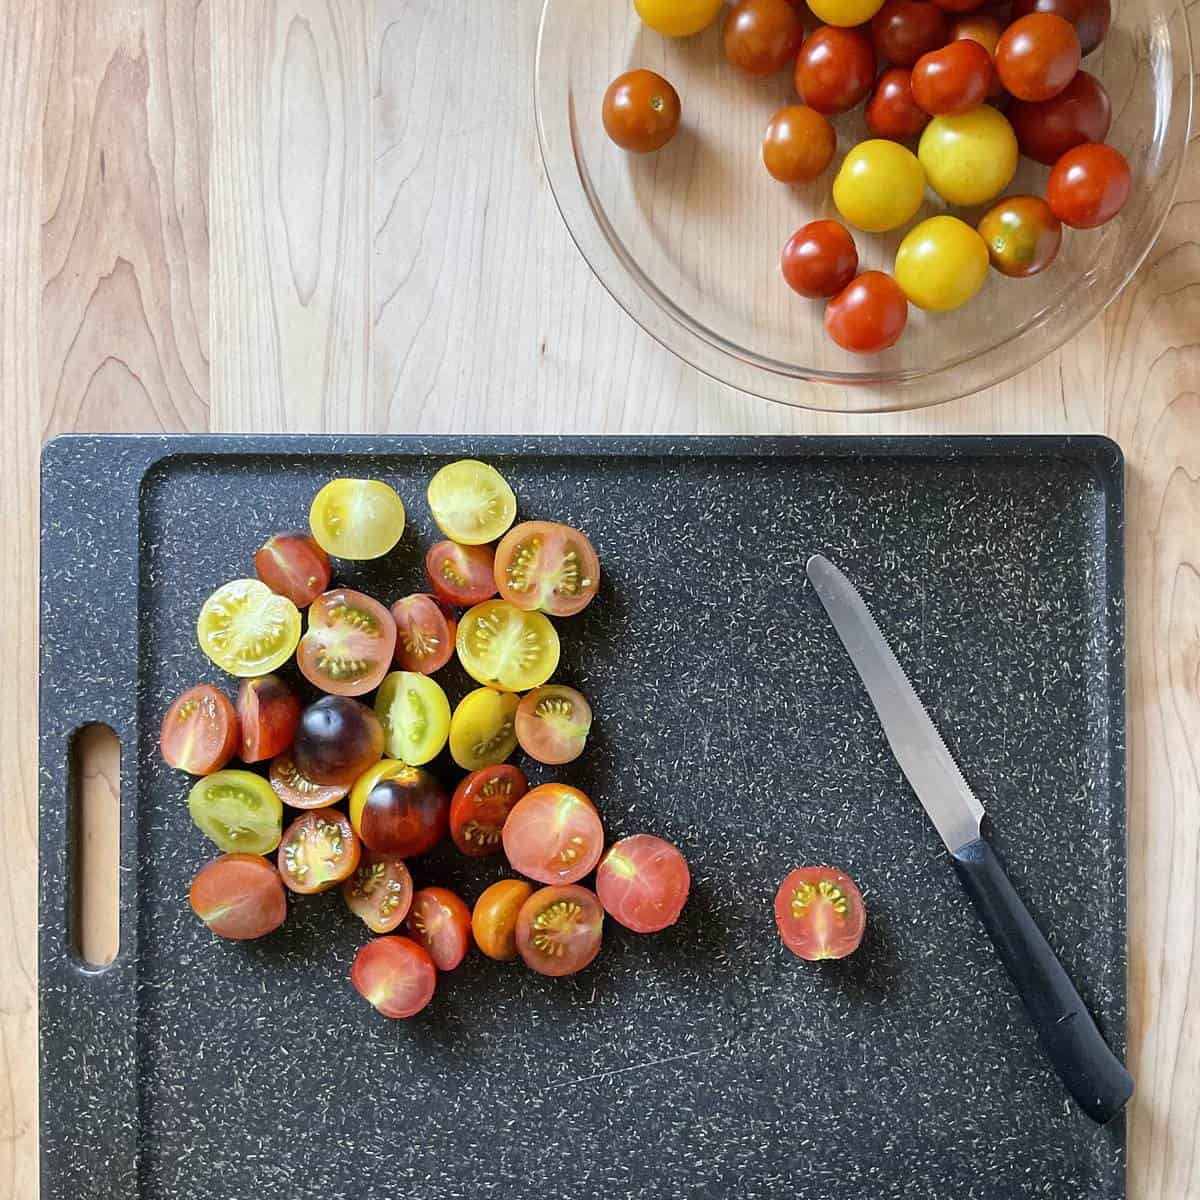 Sliced cherry tomatoes on a cutting board.